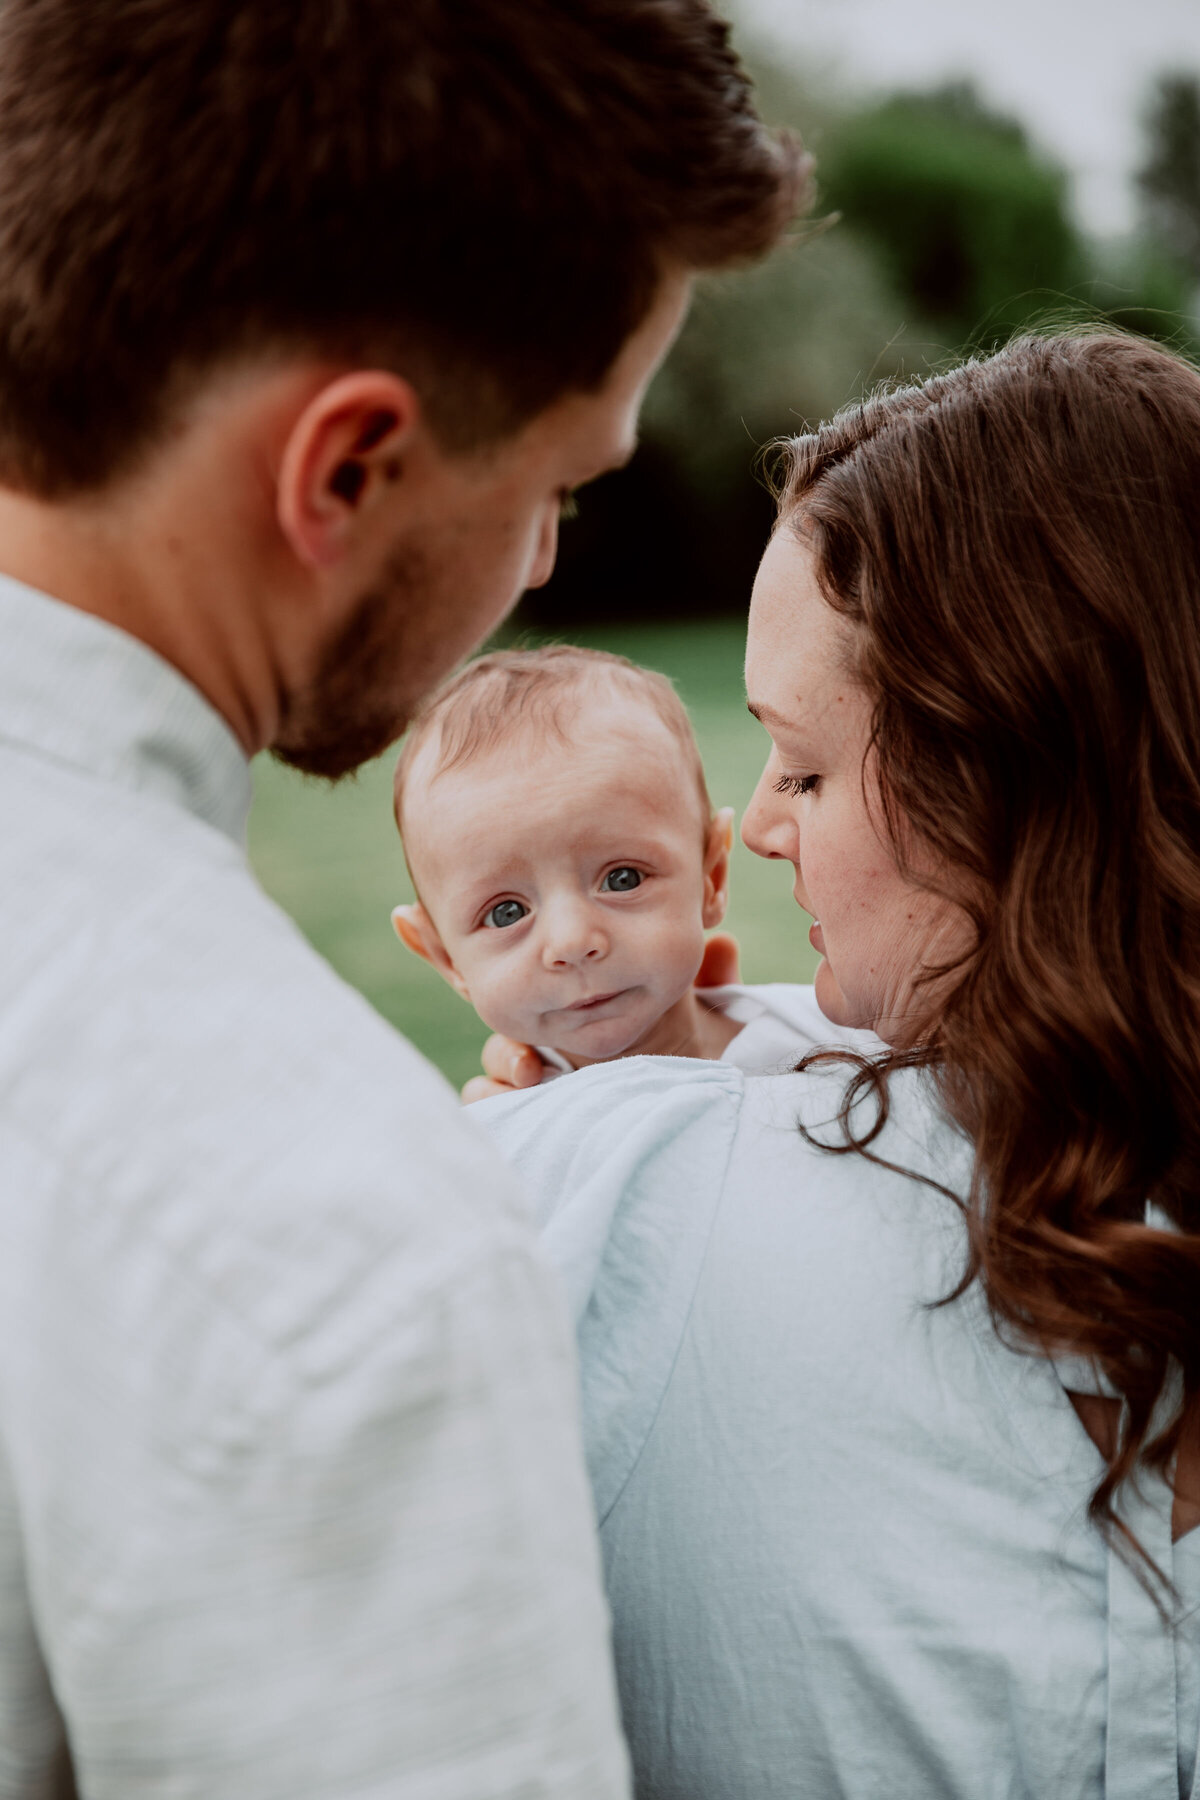 Idaho Falls newborn photographer photographs mother holding newborn baby boy as the father stands close